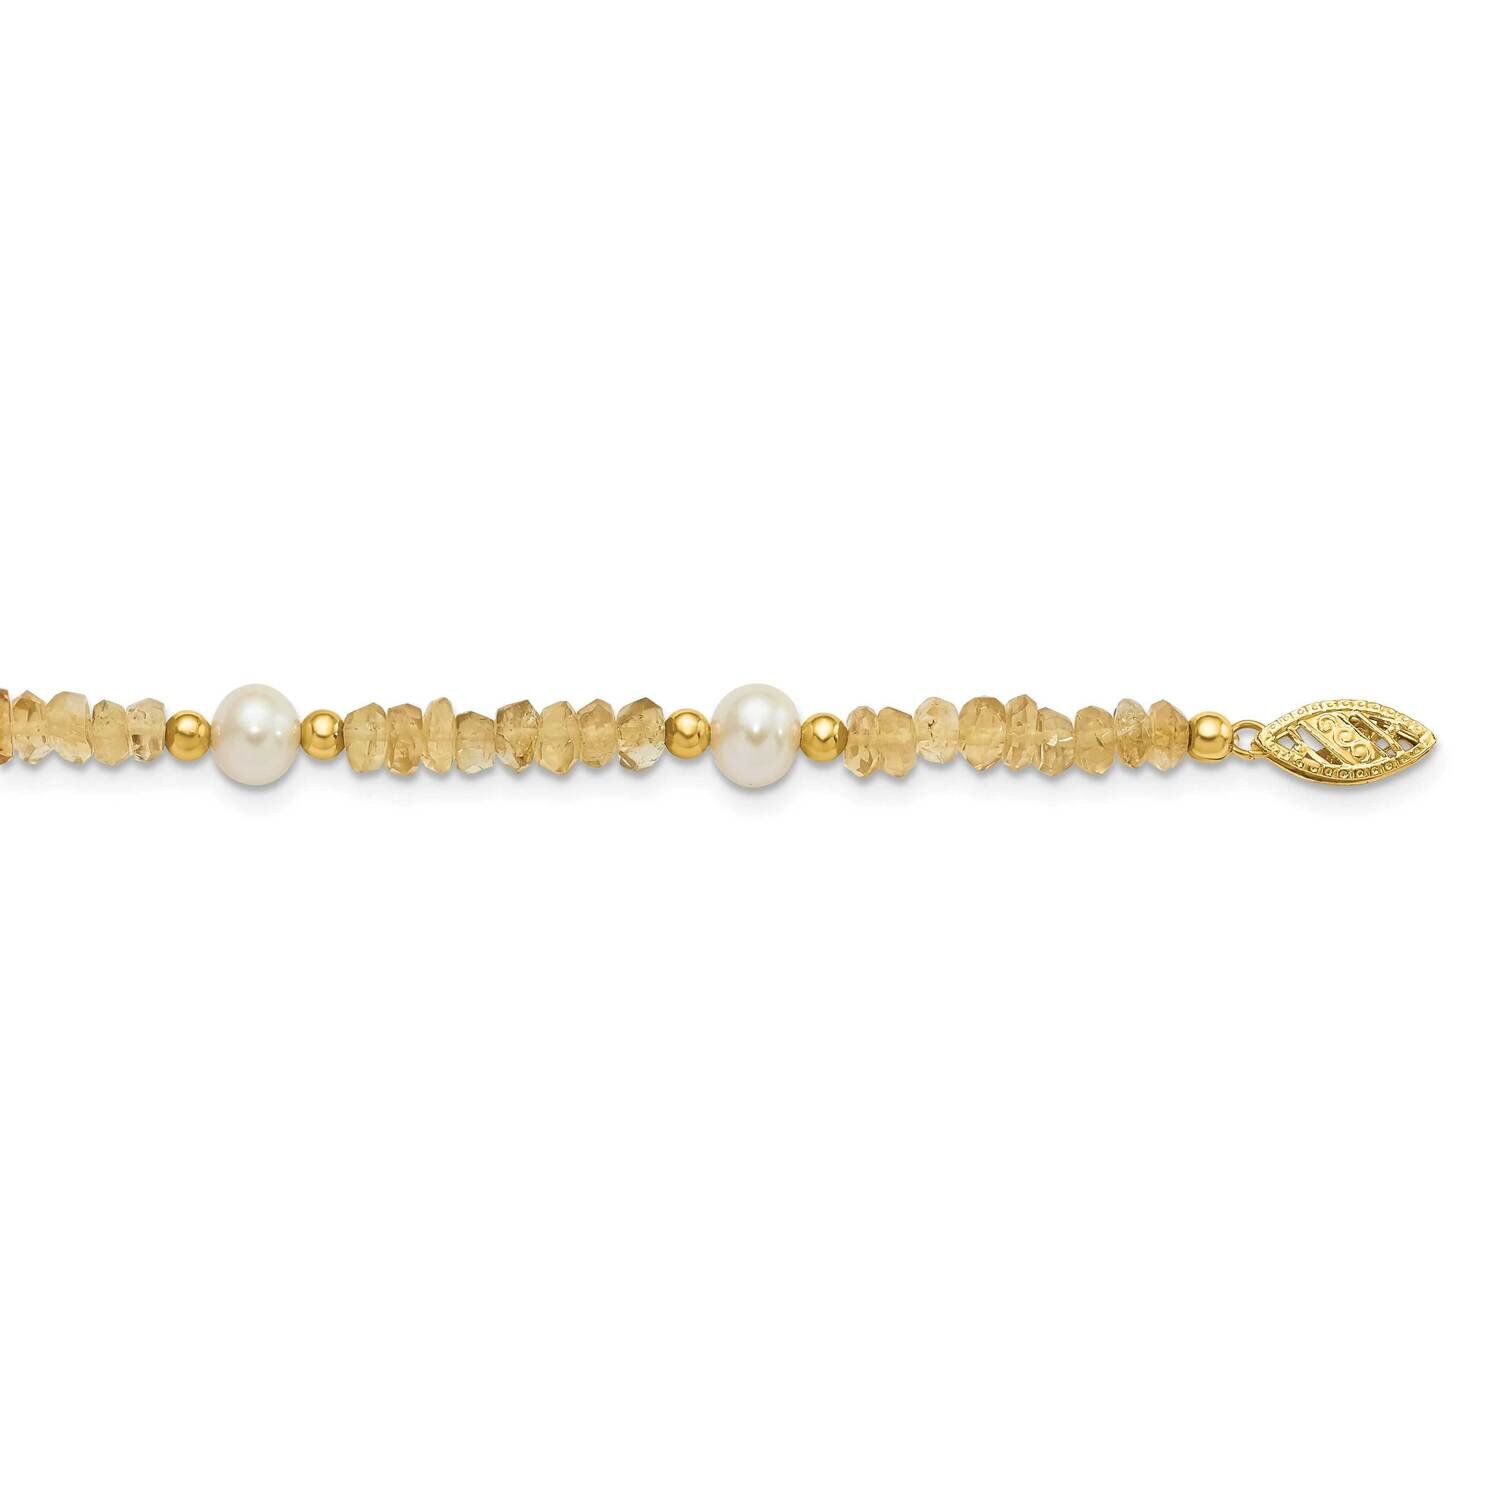 Freshwater Cultured Pearl & Citrine Necklace 18 Inch 14k Gold PR71-18